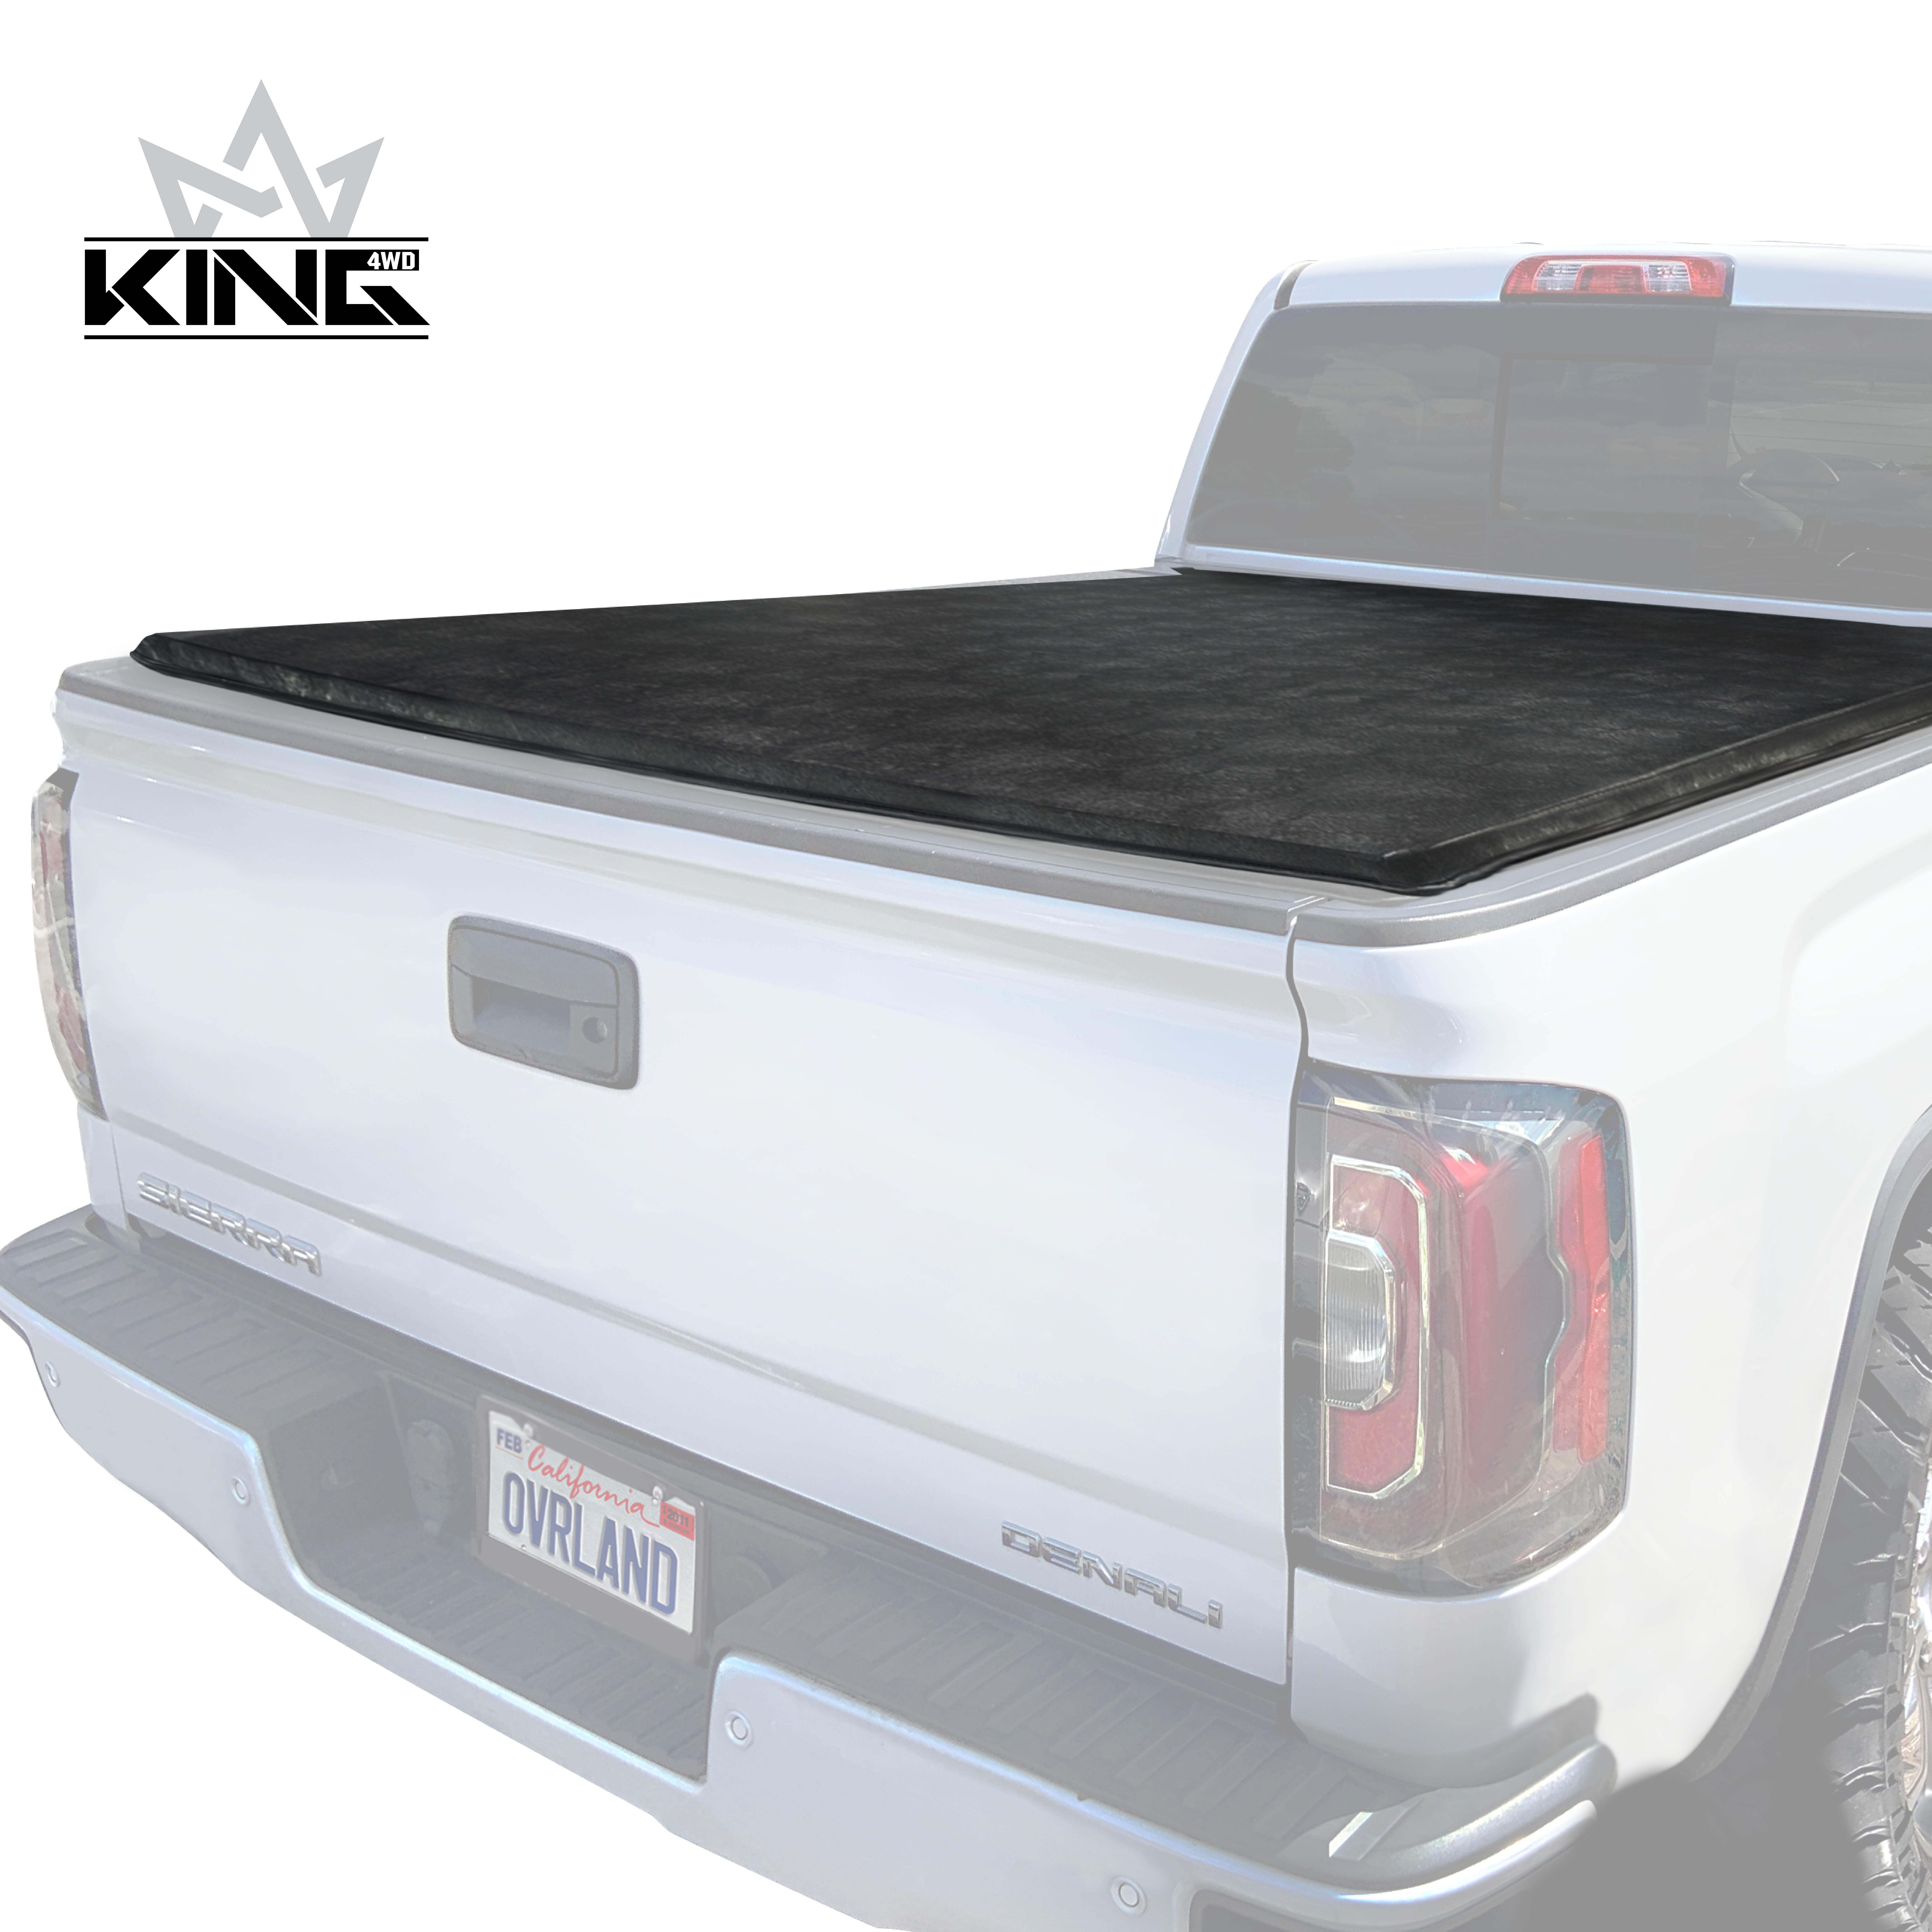 King 4WD Velcro Soft Rollup Truck Bed Tonneau Cover for Chevrolet/GMC  2014-2018, Silverado/Sierra Std/Ext/Crew Cab, 5.8' Short Bed